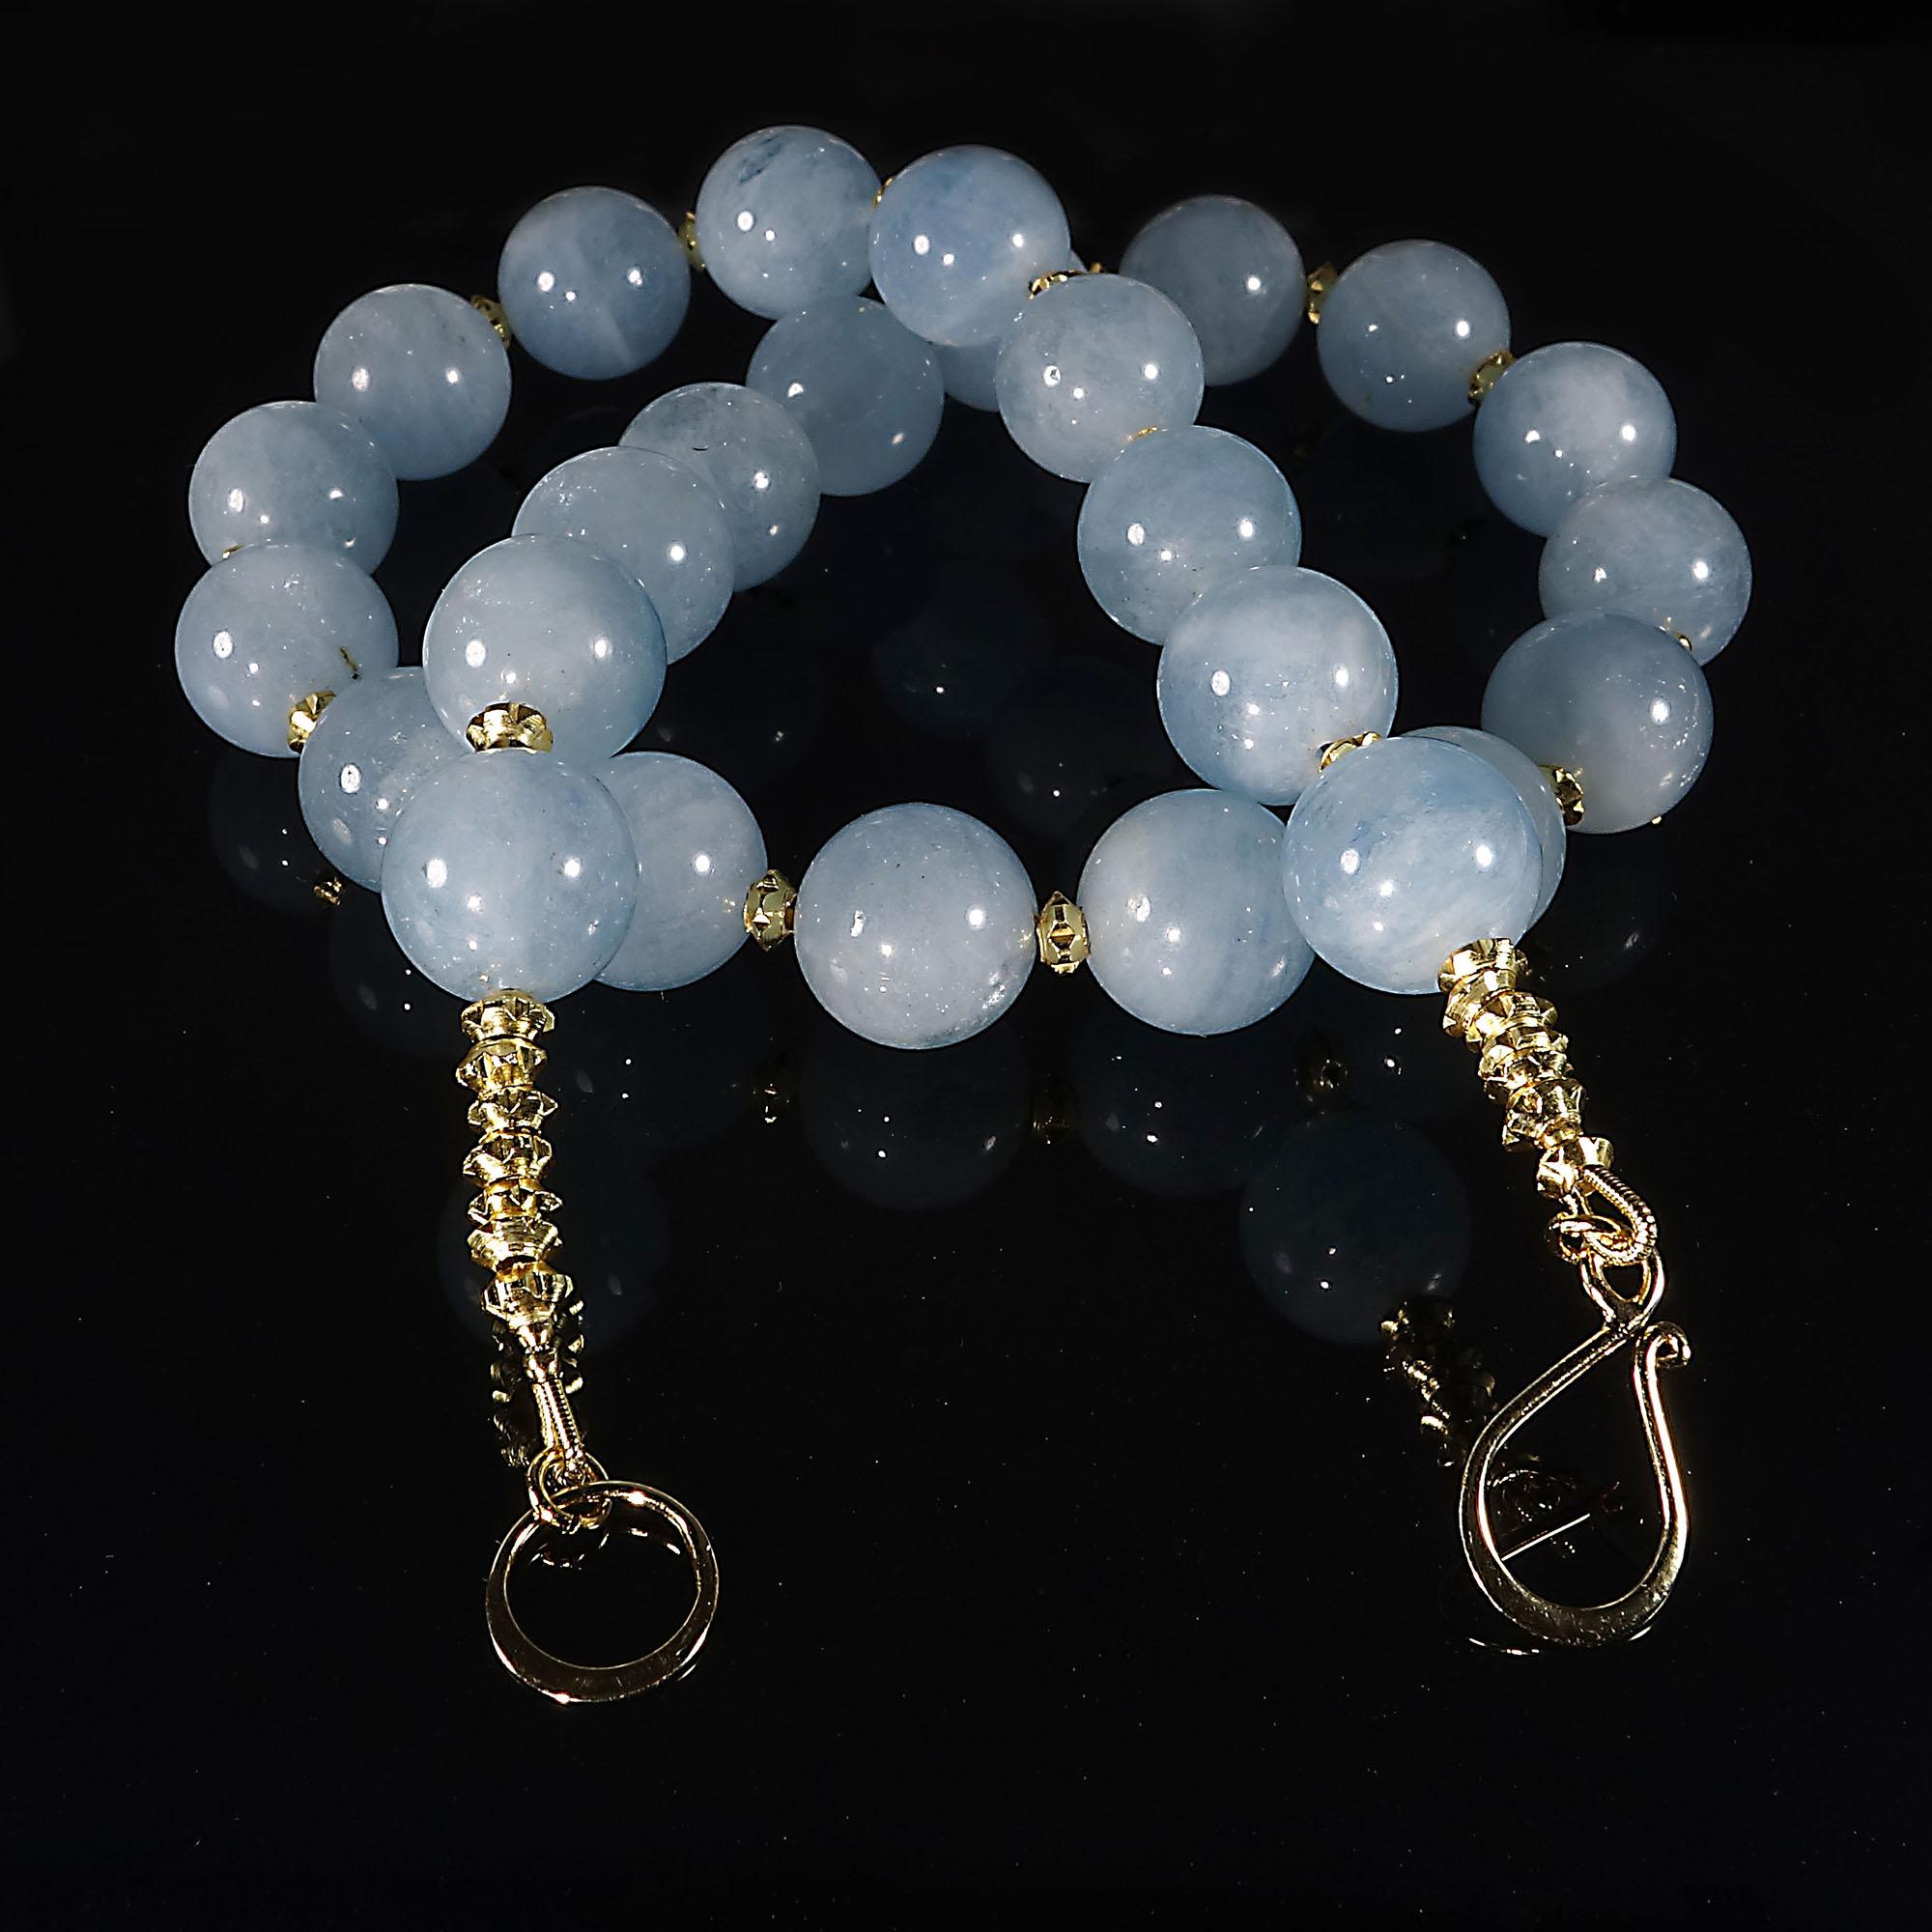 Gemjunky Translucent Aquamarine Choker Necklace with Gold Accents 1